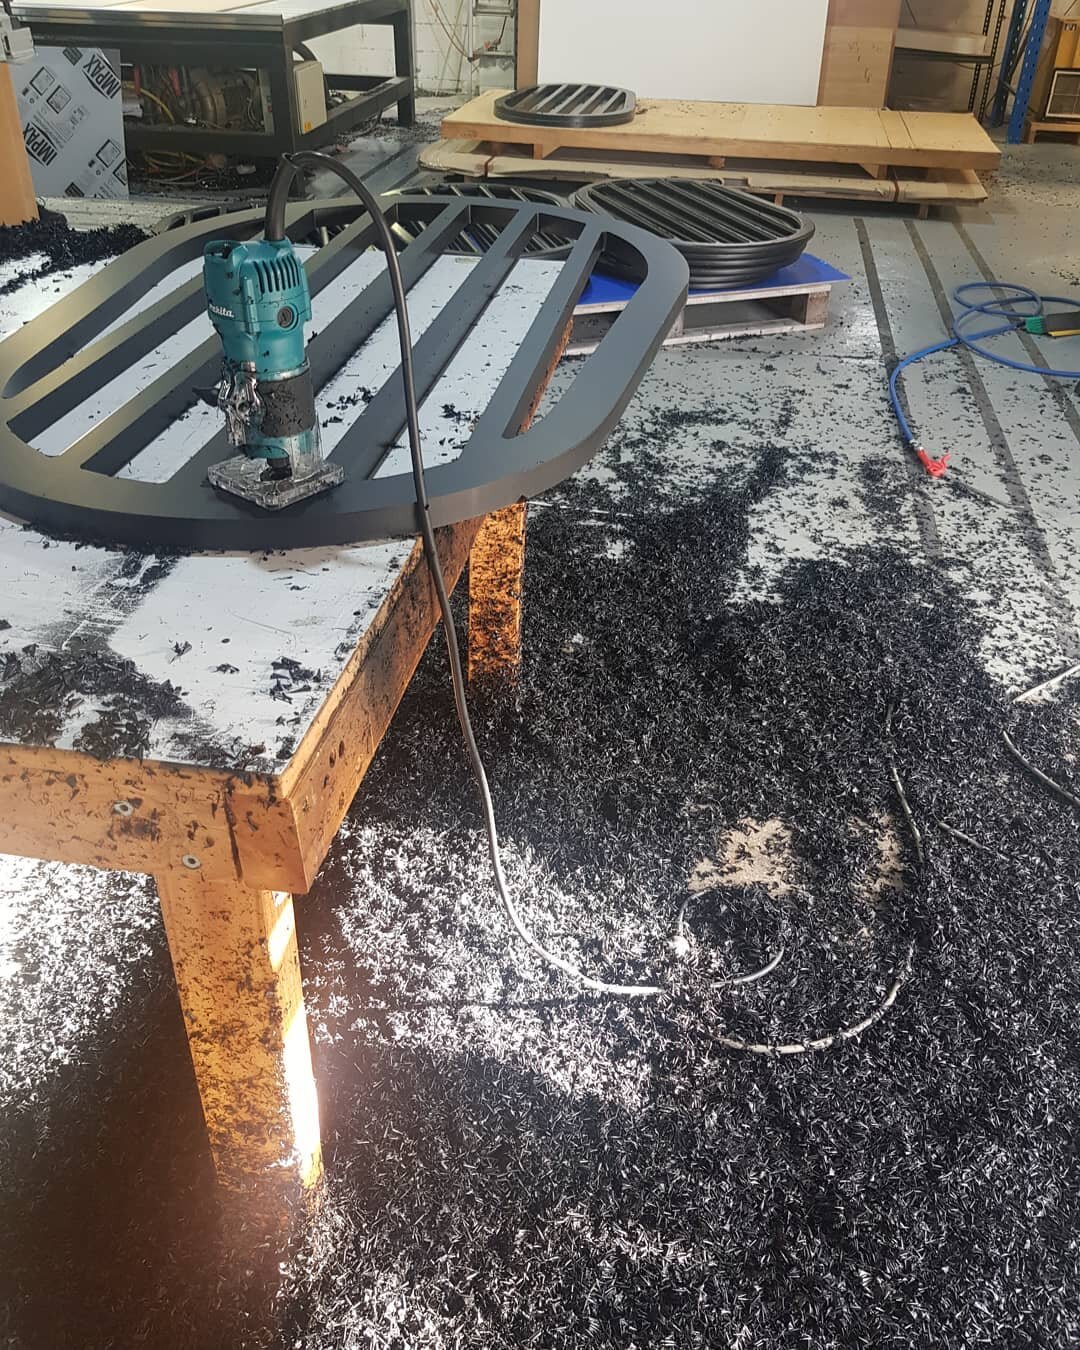 Mess day. 30 mm black HDPE by catch gates for commercial netting. Hand routing all edges 12.7 mm radius.#plasticfabrication #plasticwelding #justmakeit #acrylic&nbsp;&nbsp; #stillworking #northernriversscreens #decorativescreens&nbsp;&nbsp; #plasticf